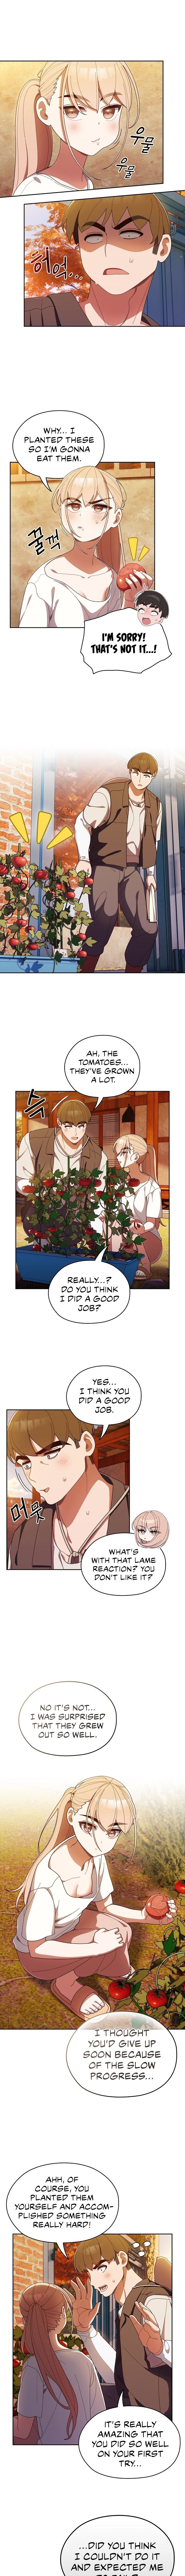 boss-give-me-your-daughter-chap-3-5